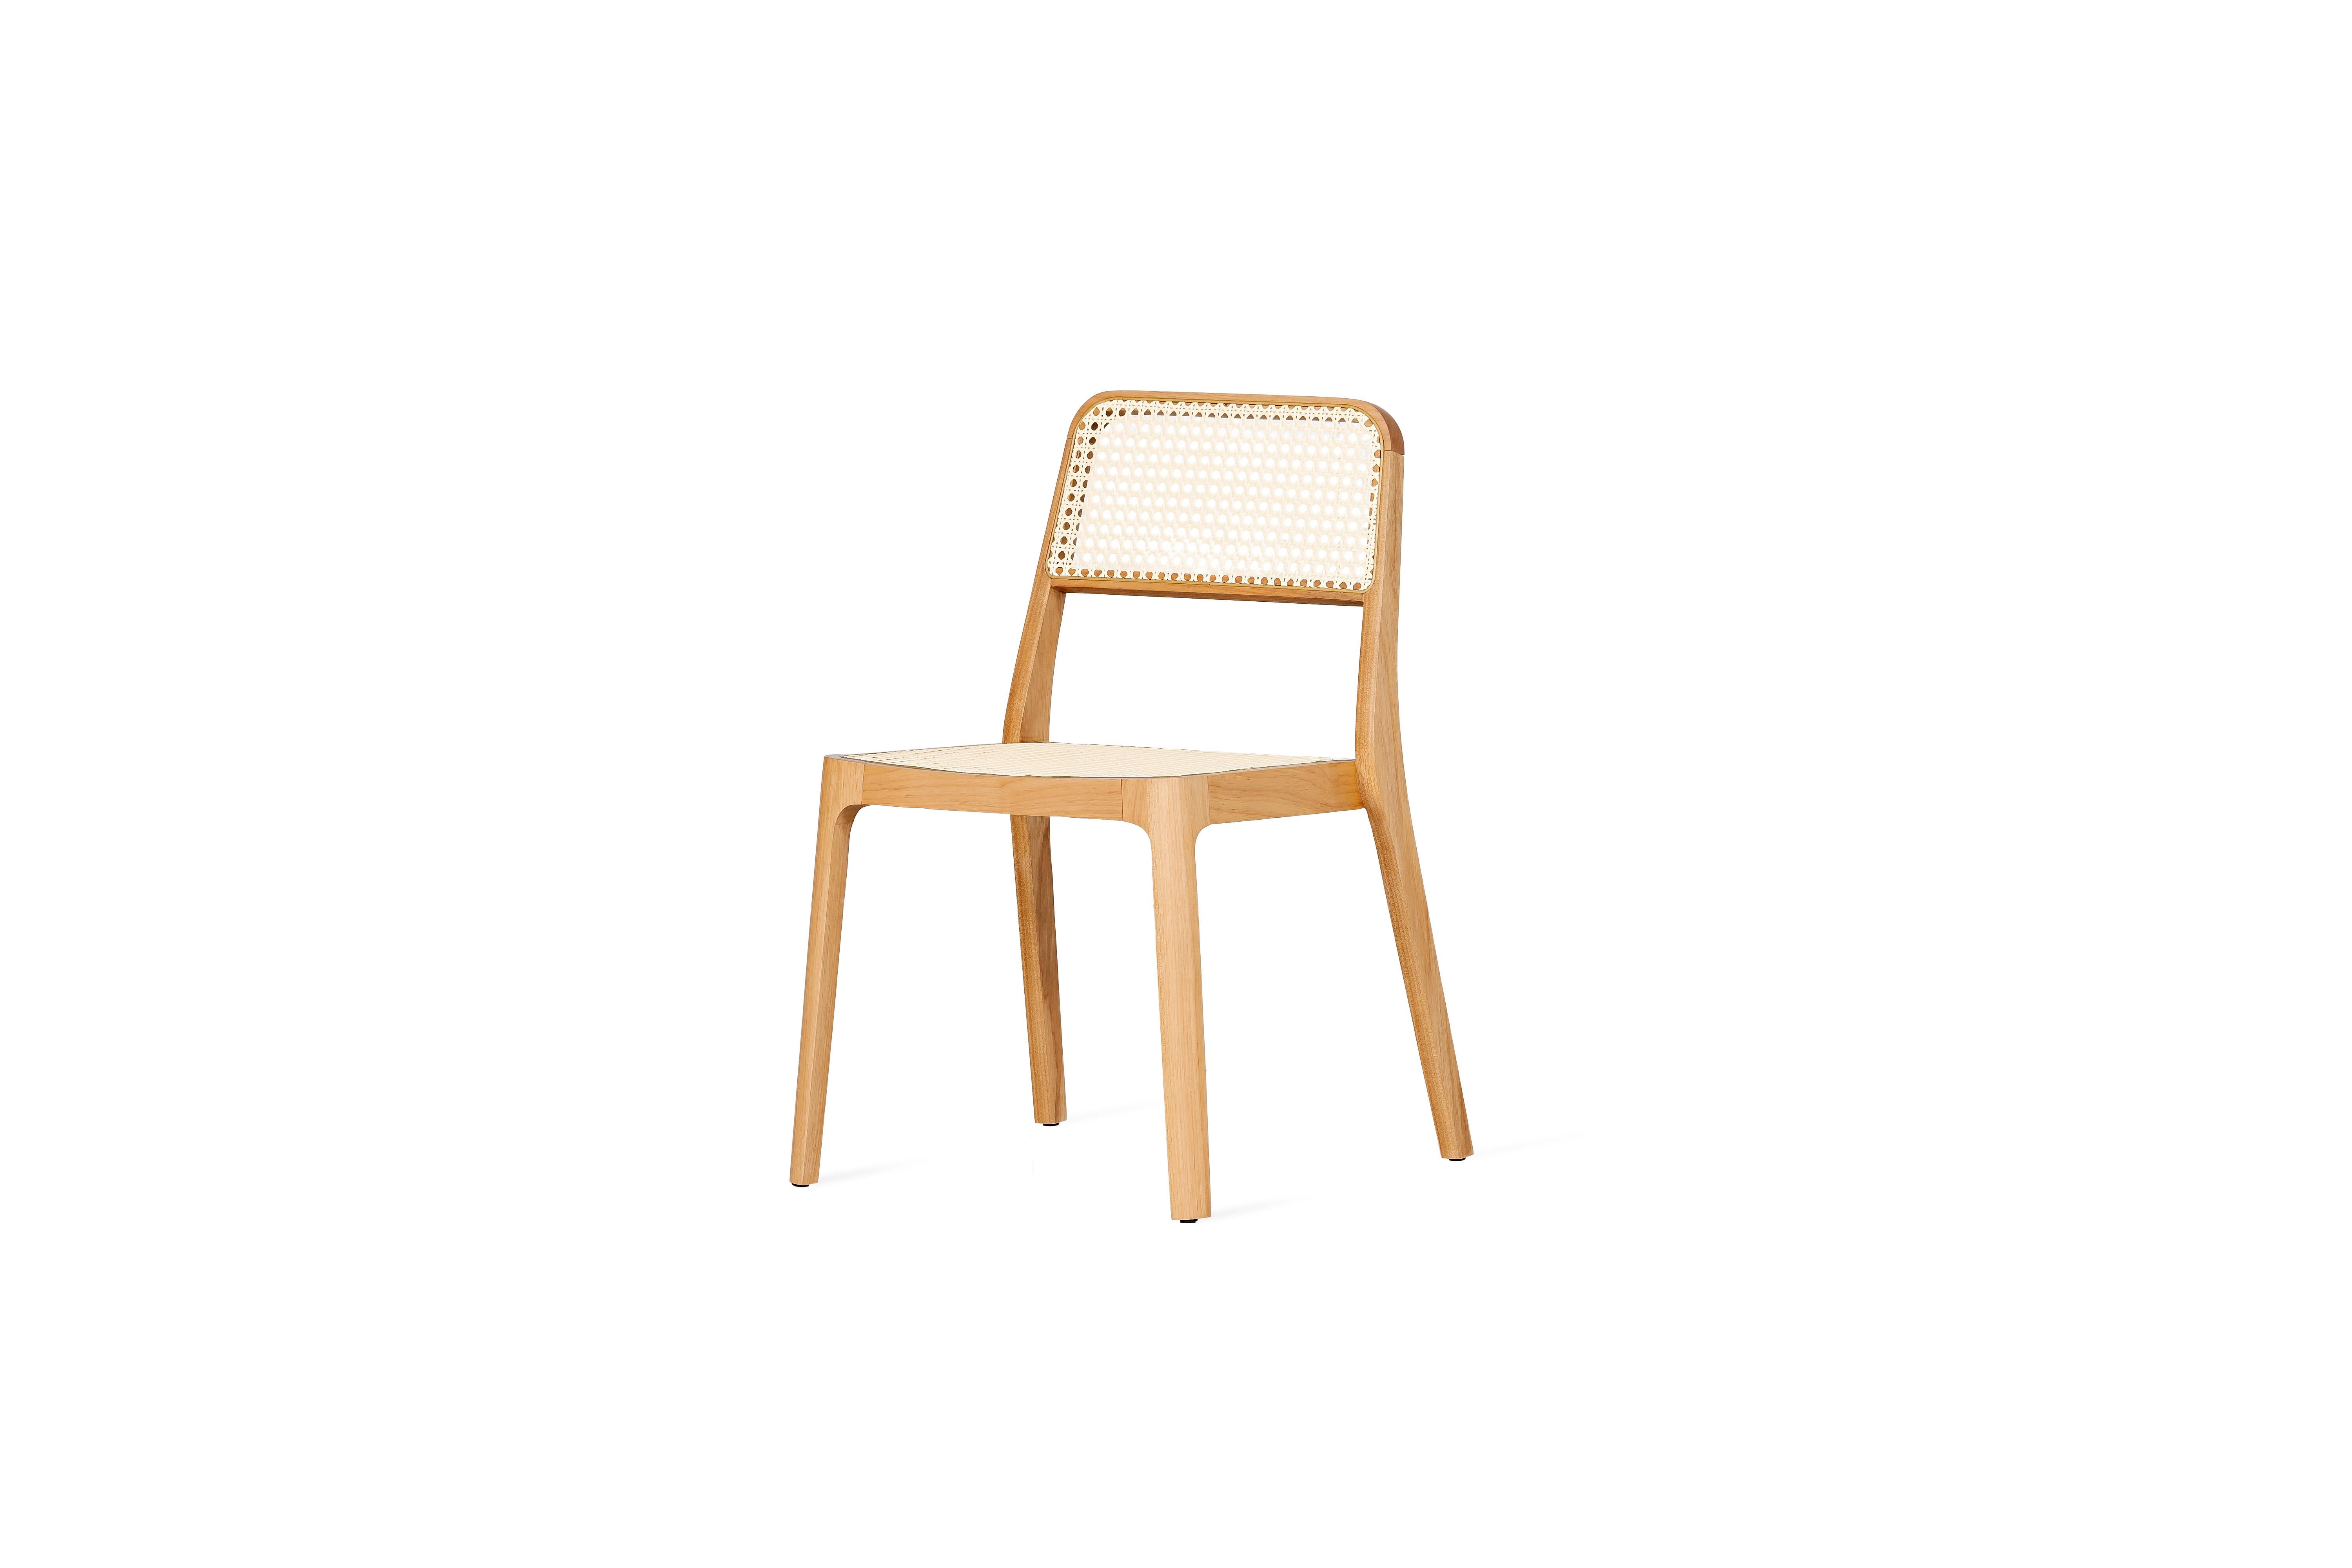 In homage to Edit Piaf, the famous French singer affectionately referred to as the “little sparrow”, for her small stature but powerful voice timbre, Piaf is a chair of exact proportions and rigorously created to be light, resistant and